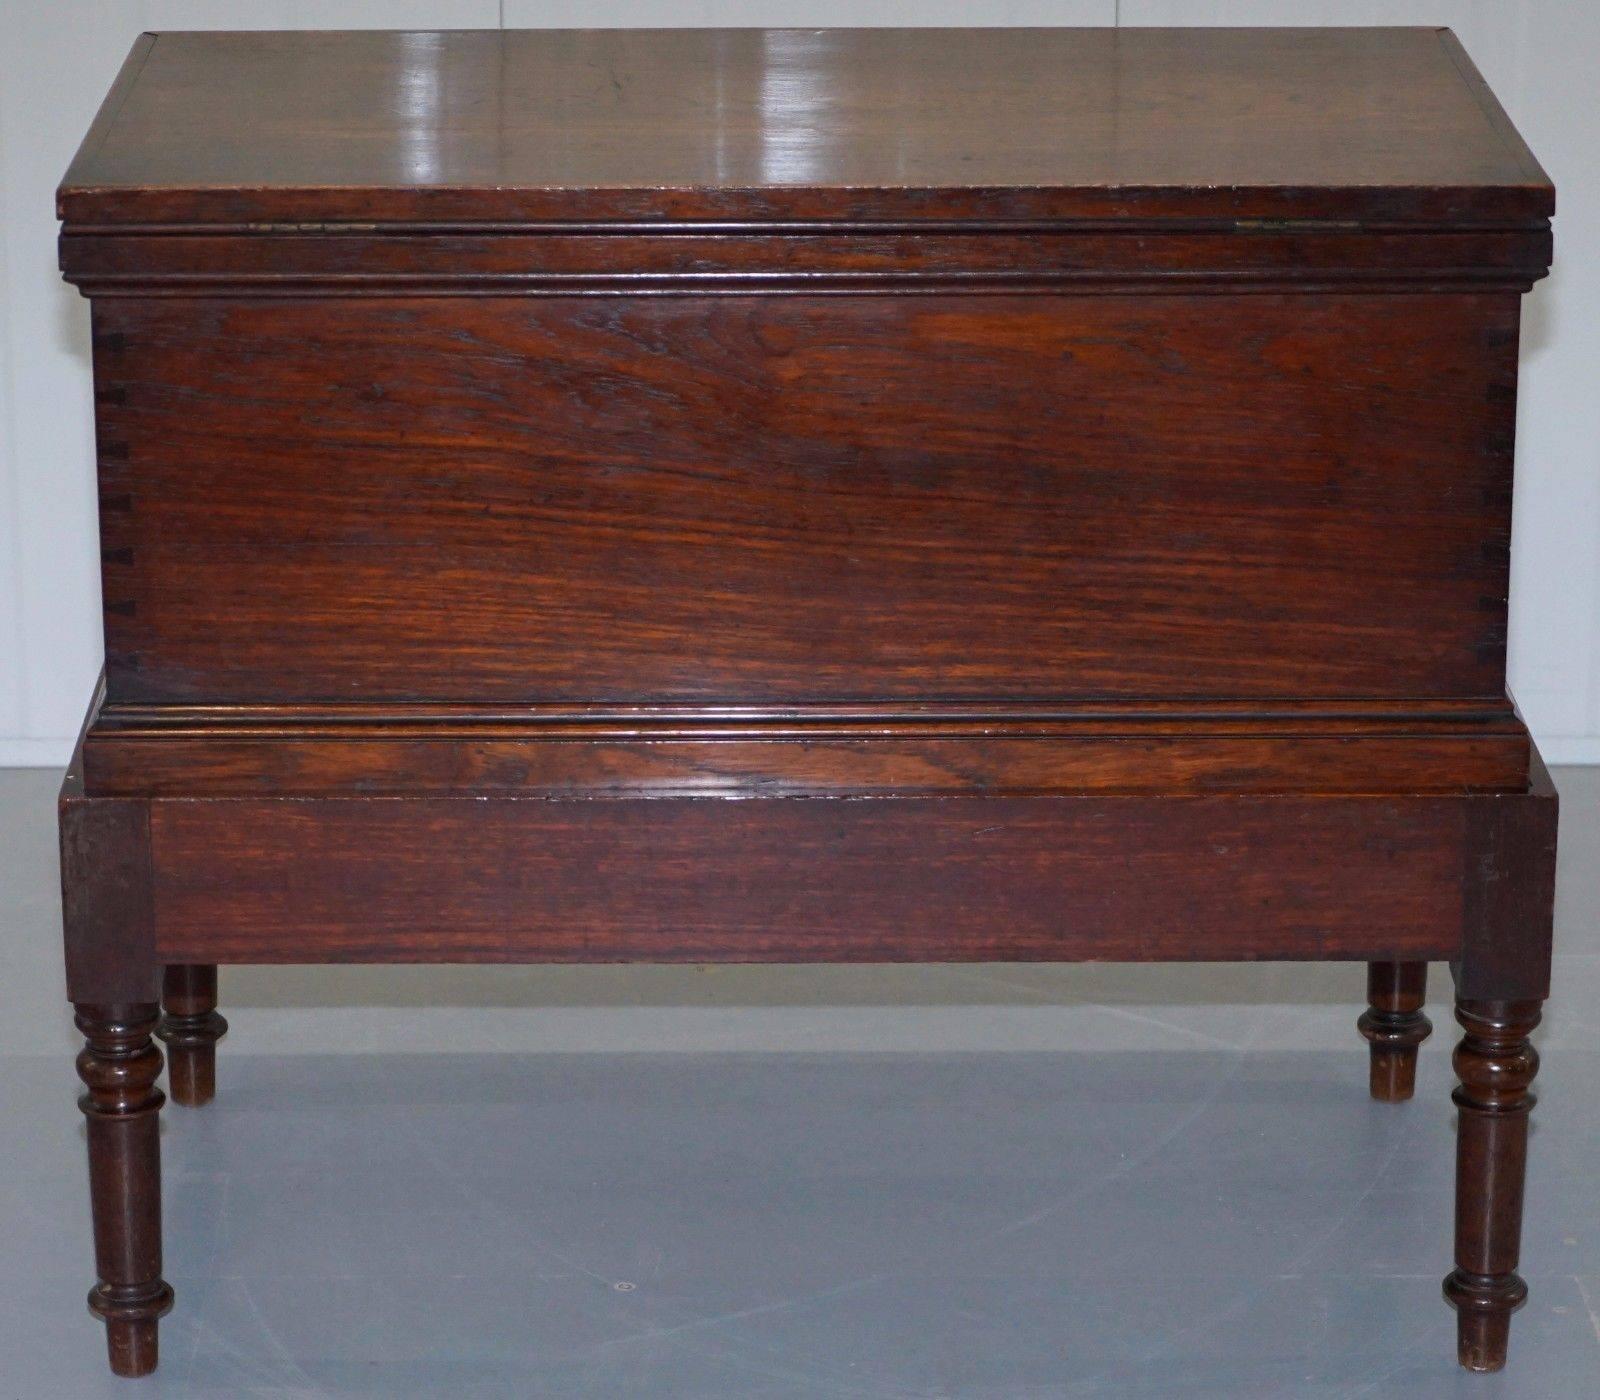 19th Century Victorian Mahogany Naval Campaign Chest on Stand with Brown Engraved Handles